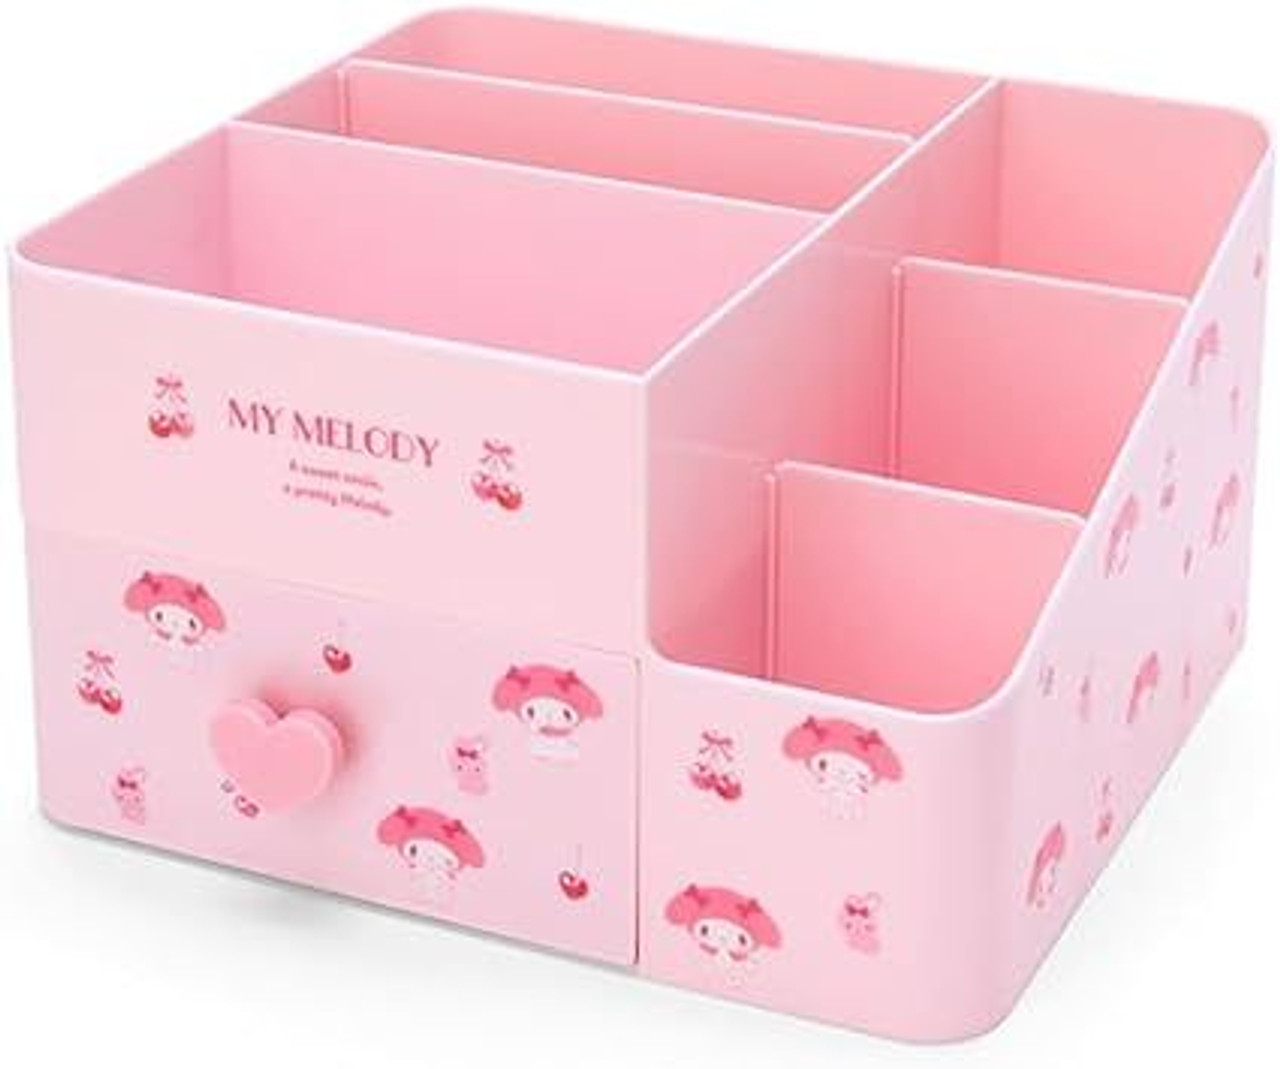 My Melody Cosmetic and Makeup Storage Box Pink Sanrio